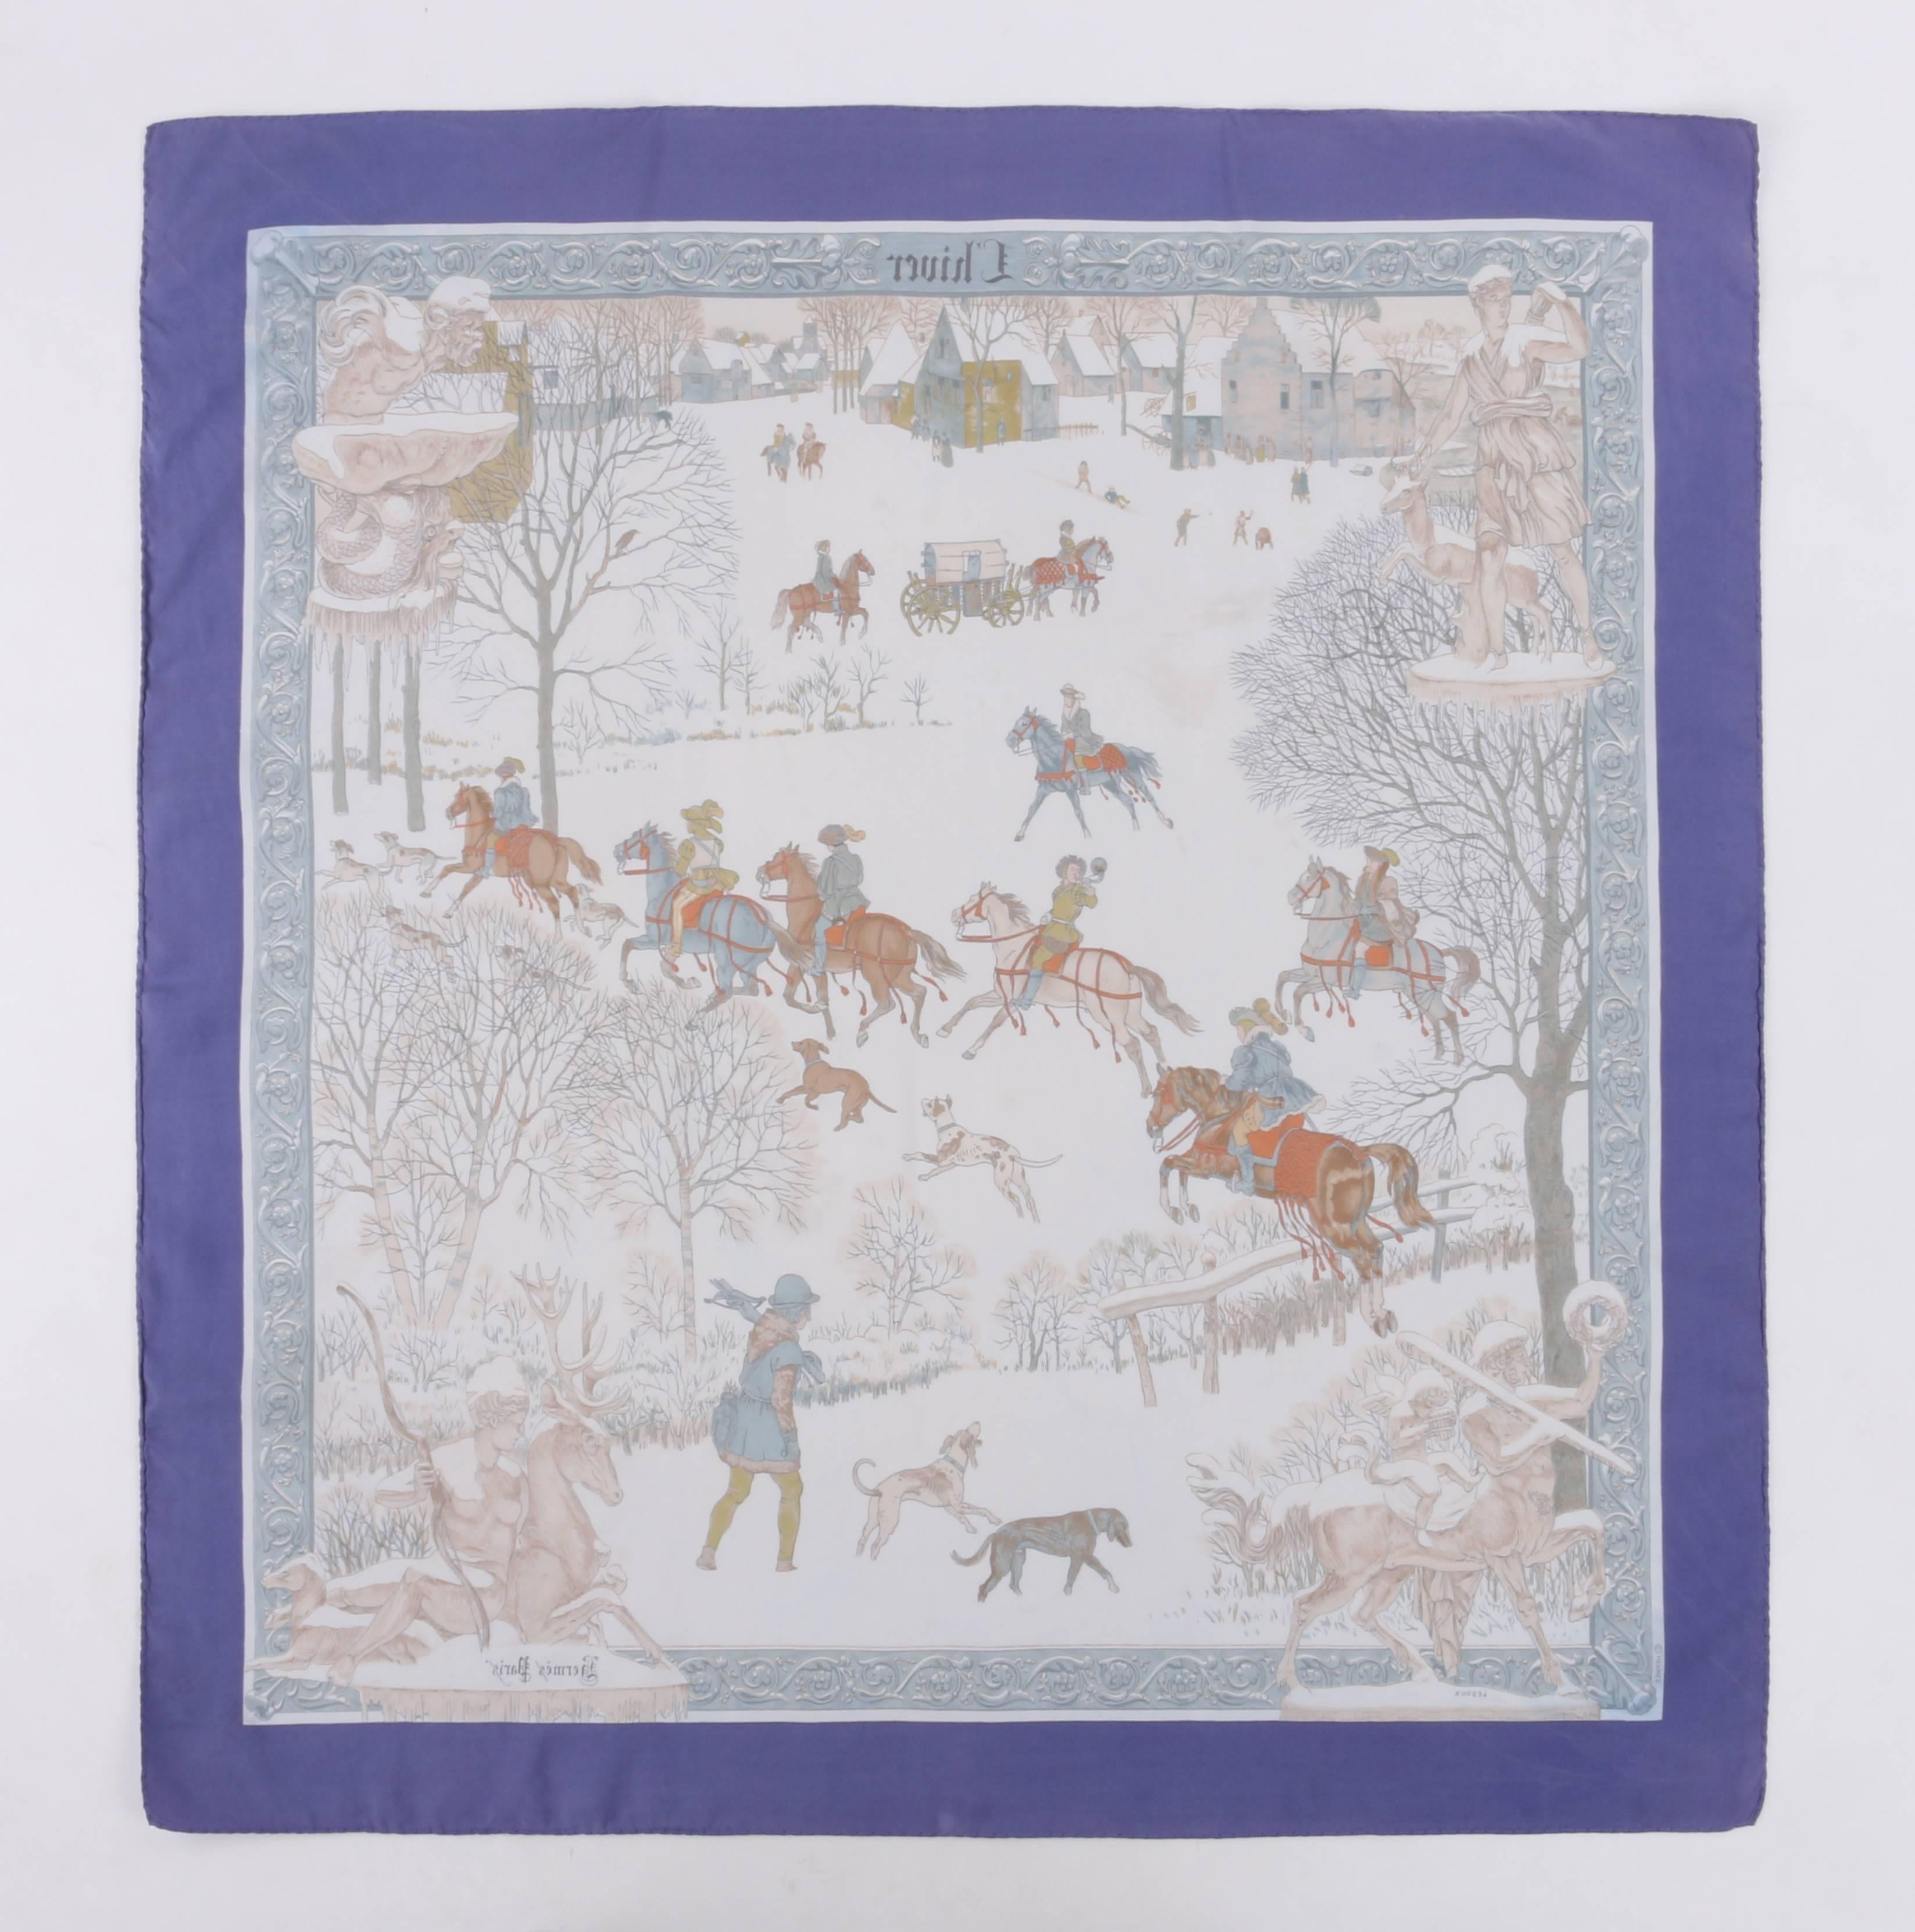 Vintage Hermes c.1968 "L'hiver" designed by Philippe Ledoux silk scarf. Purple and pale blue floral filigree boarder. Winter hunting scene motif on a winter white / off white background. Greek statuary printed at each corner.